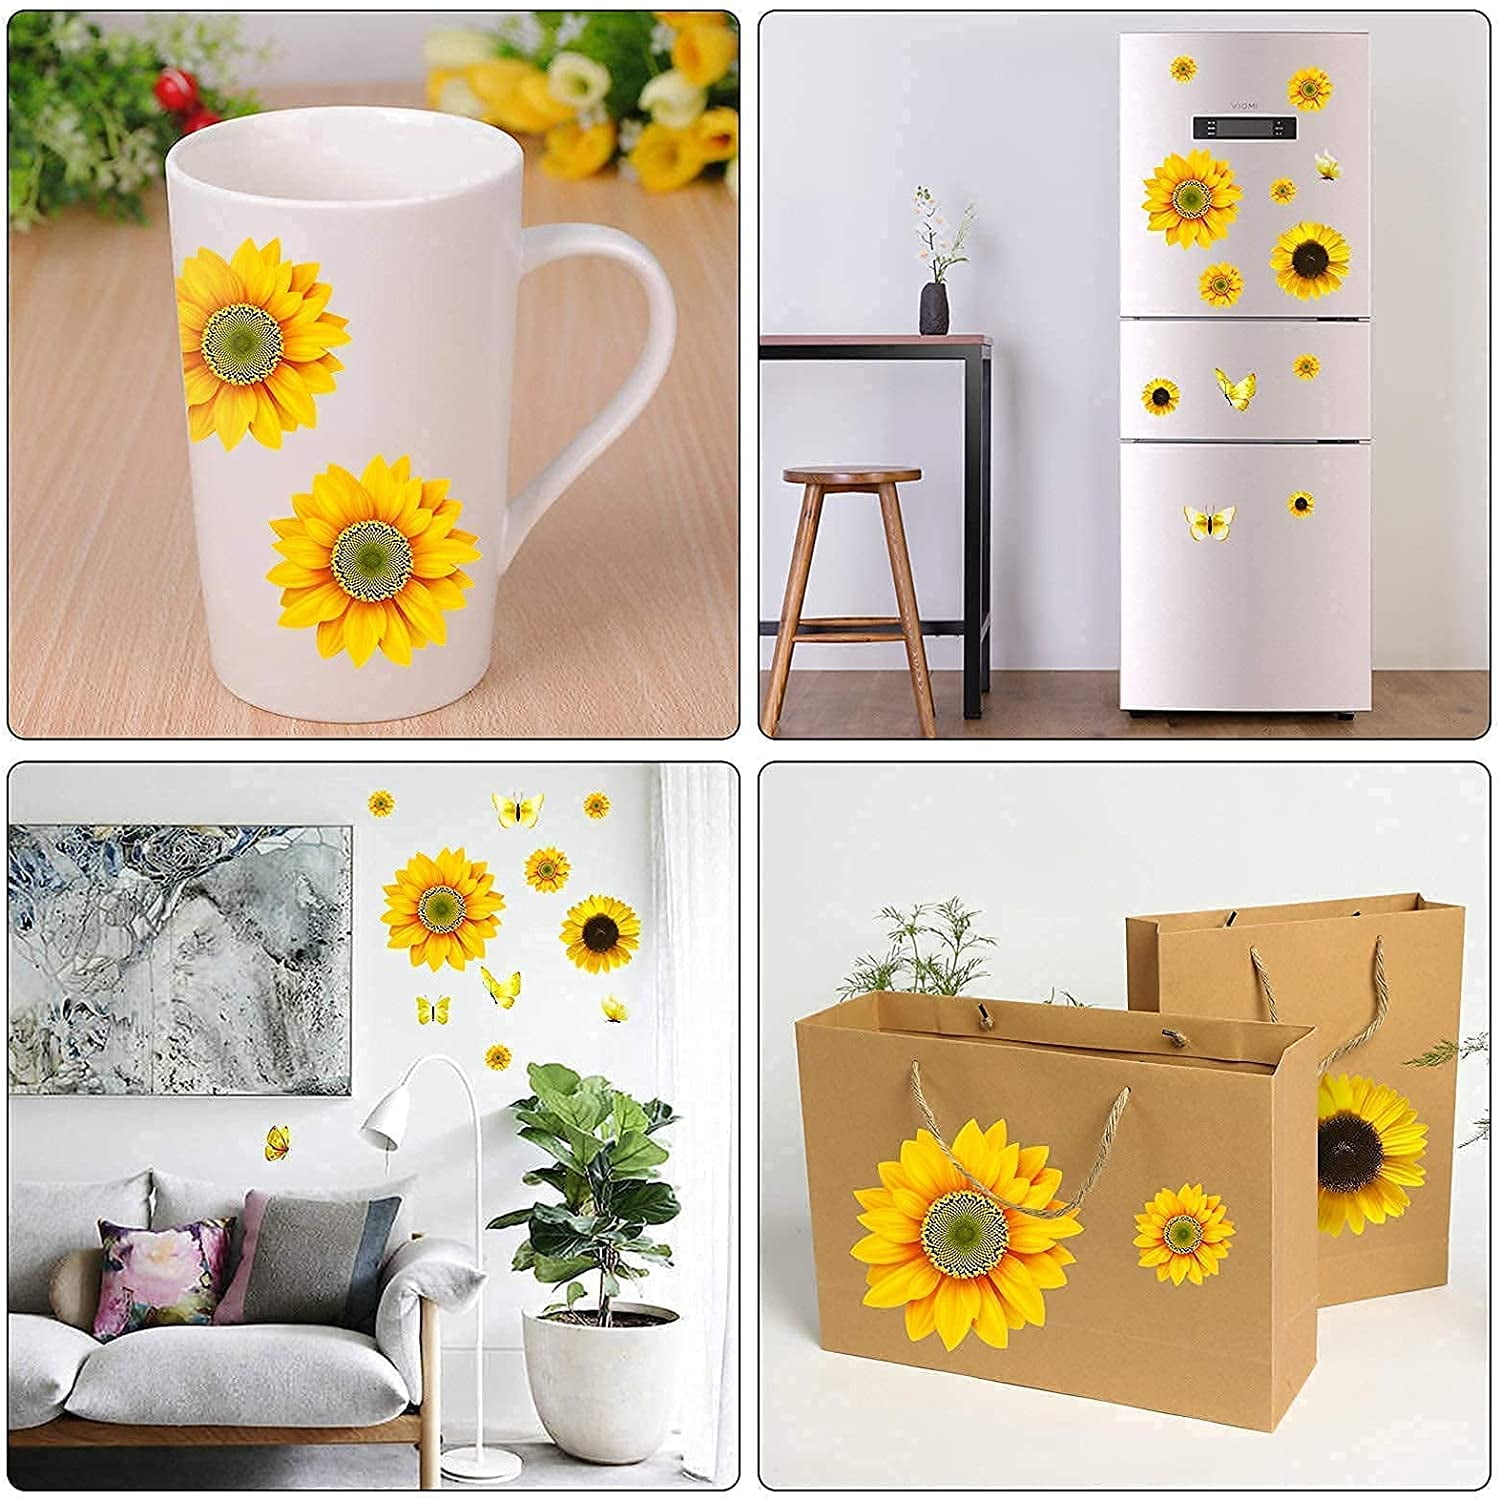 Sunflower Wall Stickers Flowers Home Room Decoration Decals For Furniture  Wallpapers Waterproof Self-adhesive Poster Murals - Wall Stickers -  AliExpress